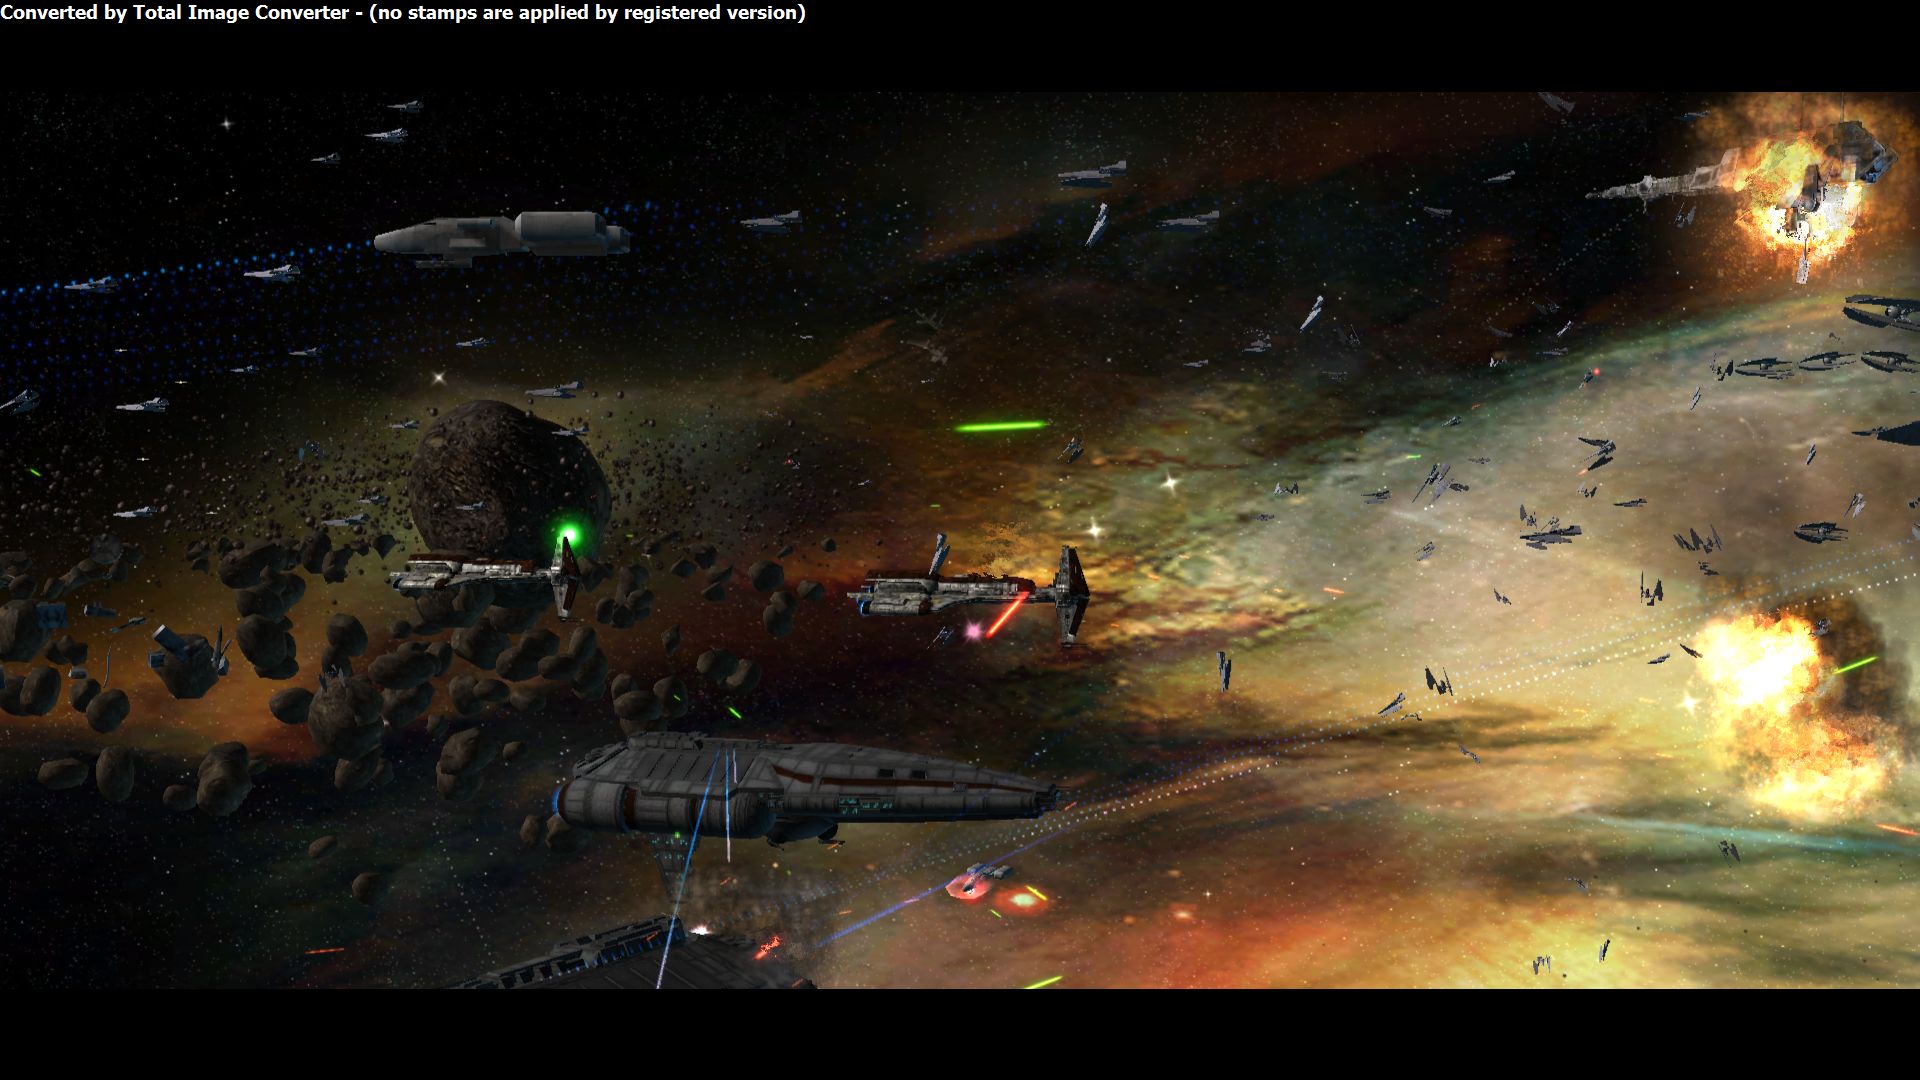 The Most Epic Battle Image Old Republic At War Mod For Star Wars